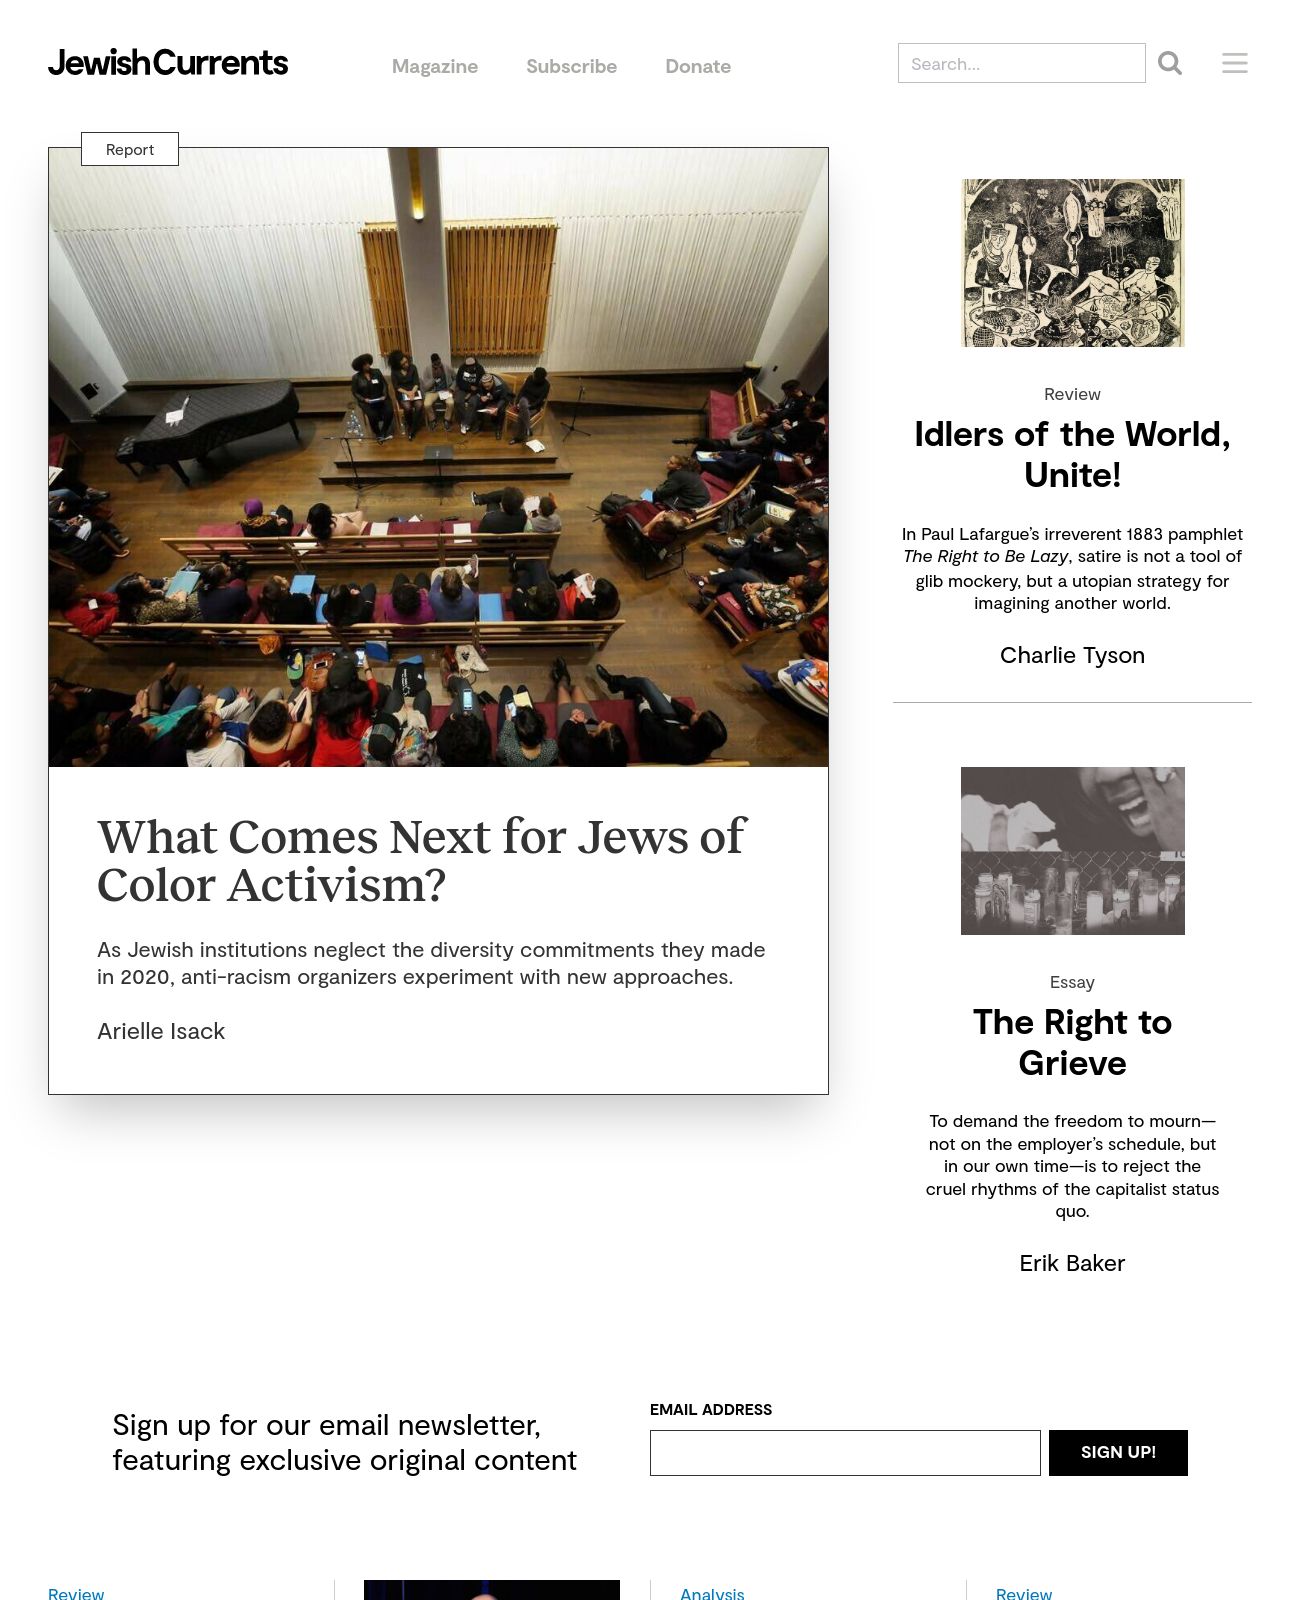 Jewish Currents at 2023-03-24 07:10:51-04:00 local time